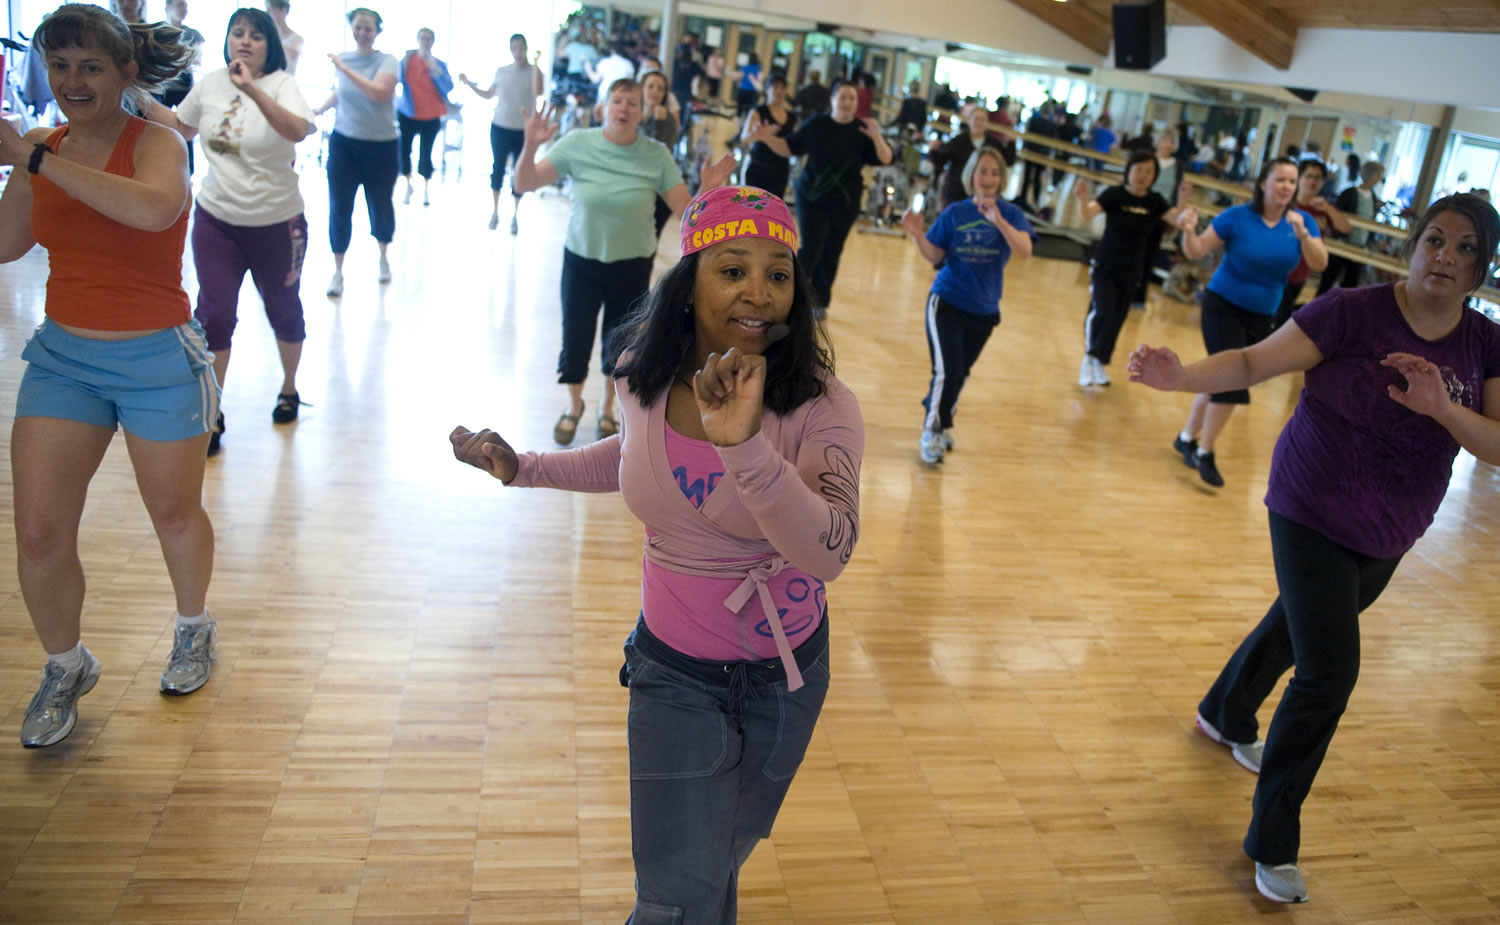 Fitness instructor Rachelle Wish, foreground center, leads a Zumba class at the Marshall Community Center.